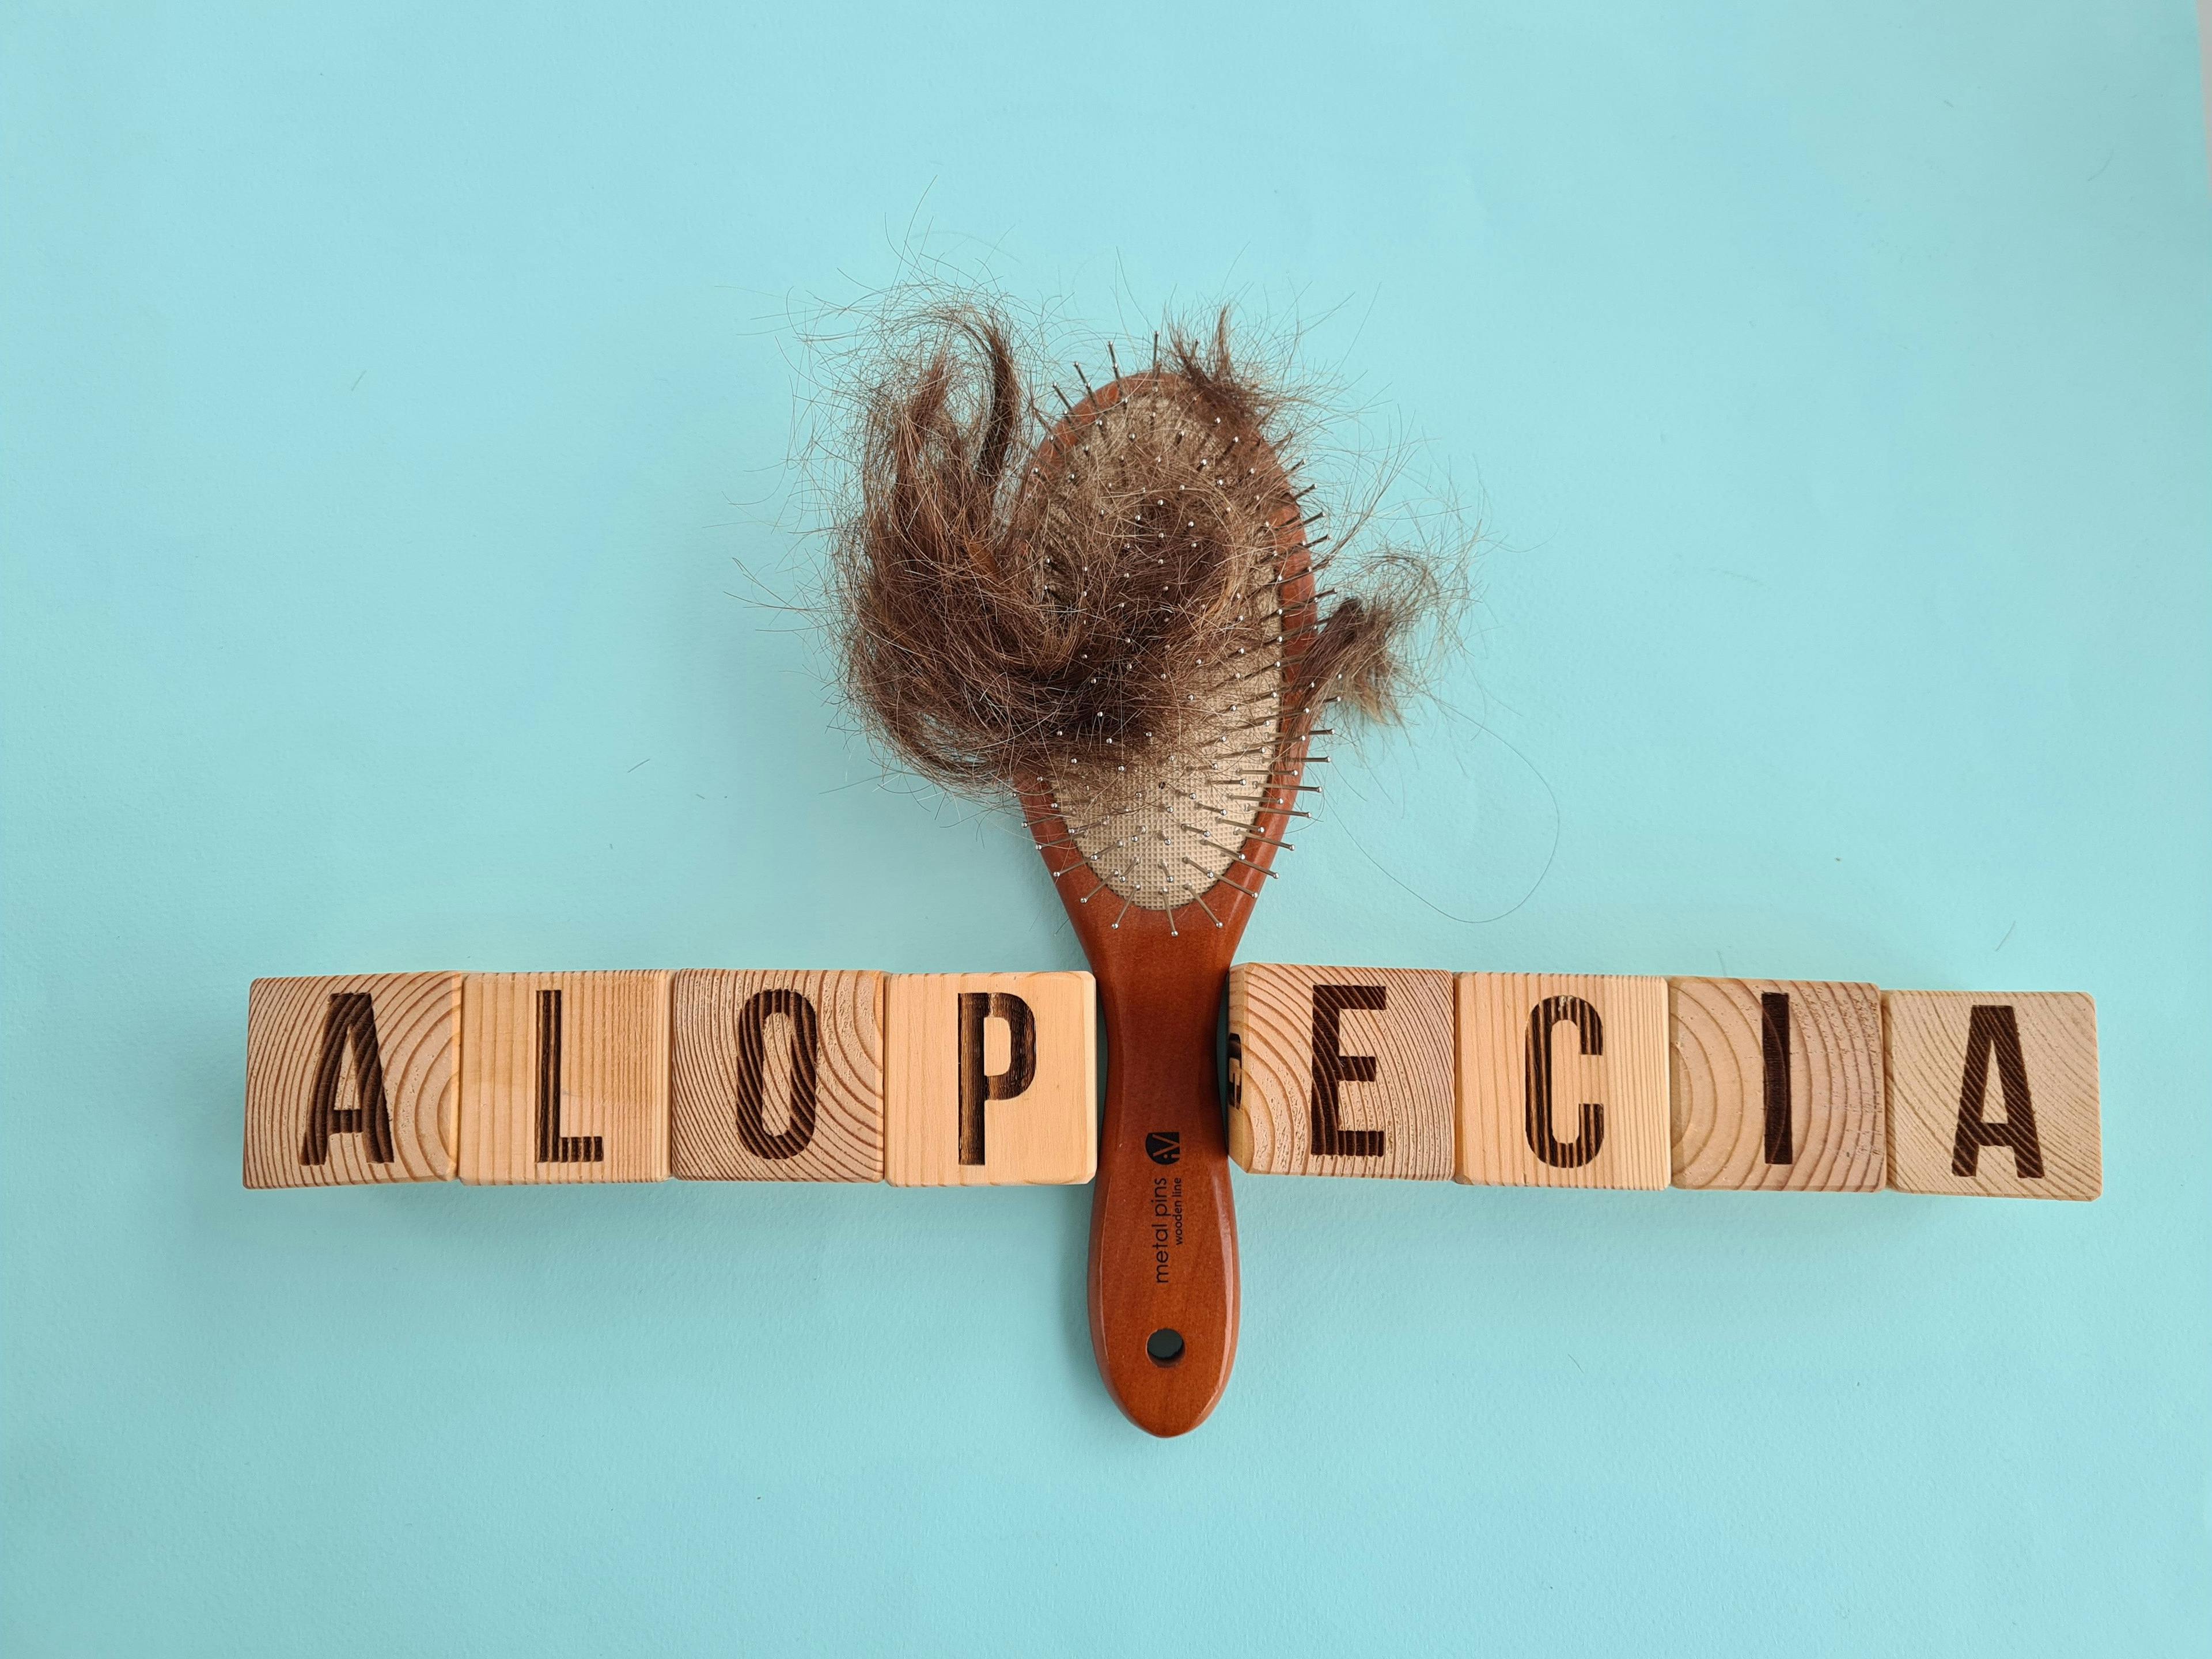 Hair loss on brush with AA text. | Image Credit: Nadzeya- stock.adobe.com